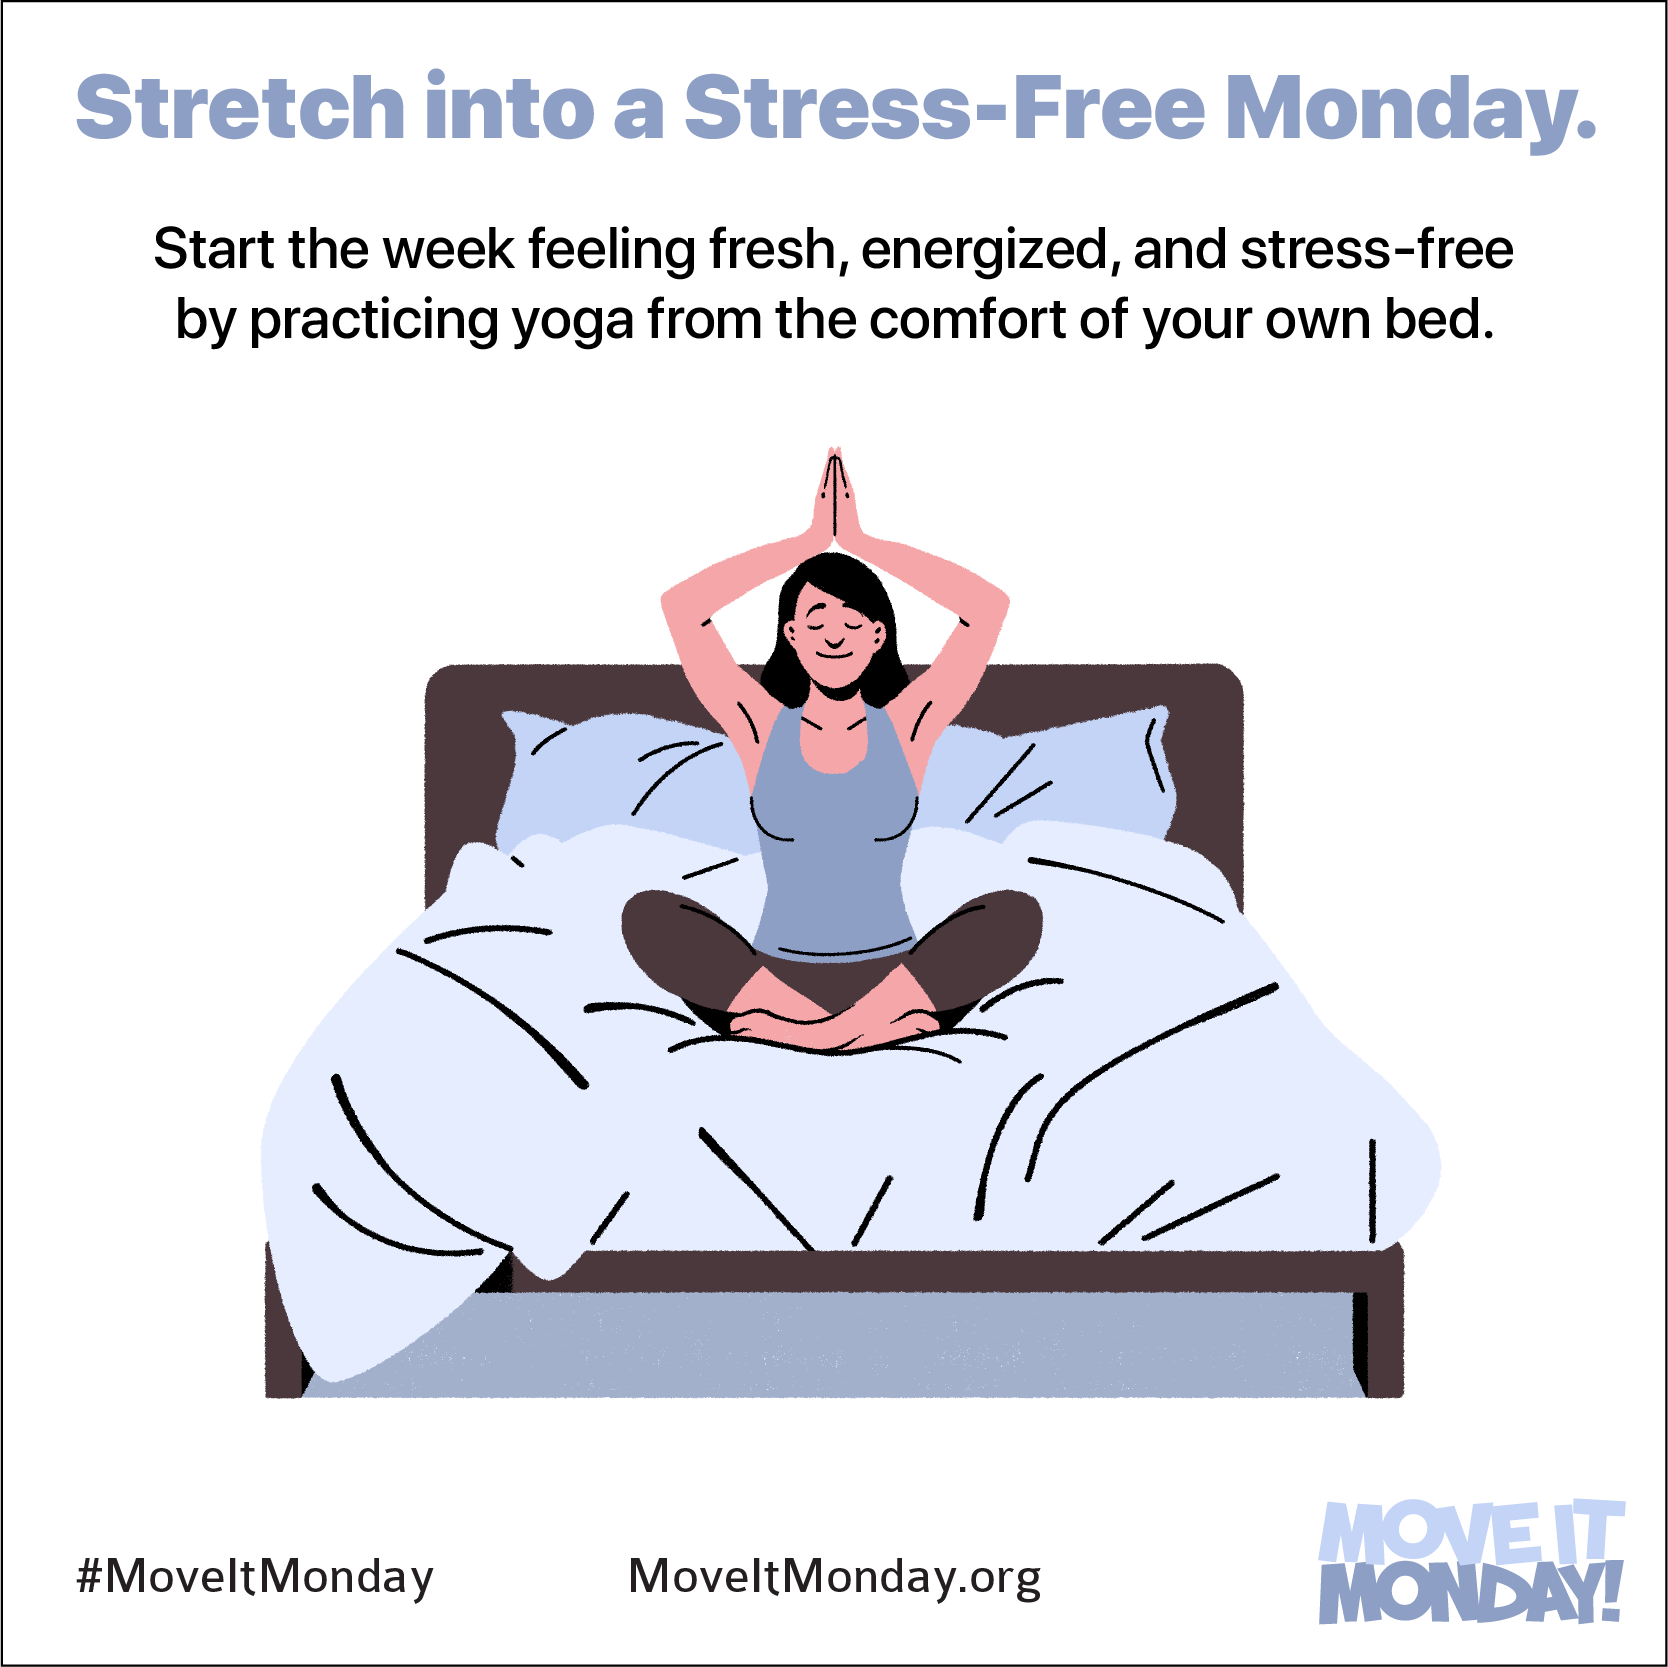 Stretch into a stress-free Monday. Start the week feeling fresh, energized, and stress-free by practicing yoga from the comfort of your own bed.